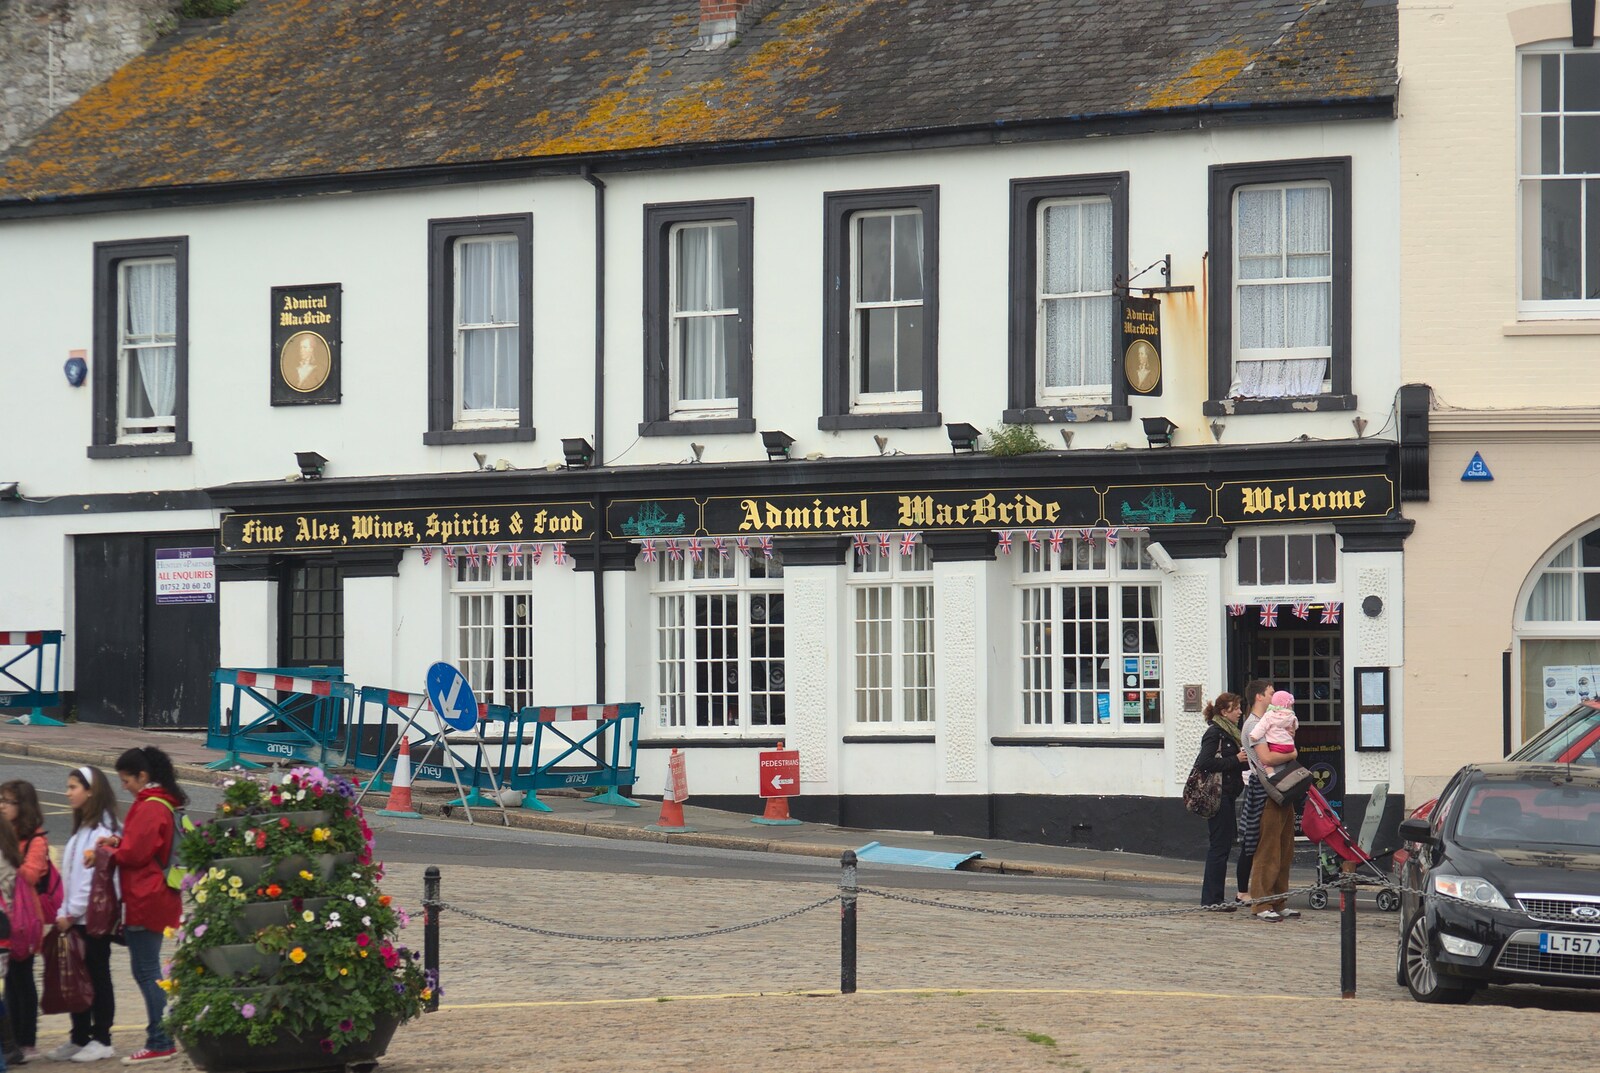 The Admiral MacBride pub from A Camper Van Odyssey: Charmouth, Plymouth, Dartmoor and Bath - 20th June 2011